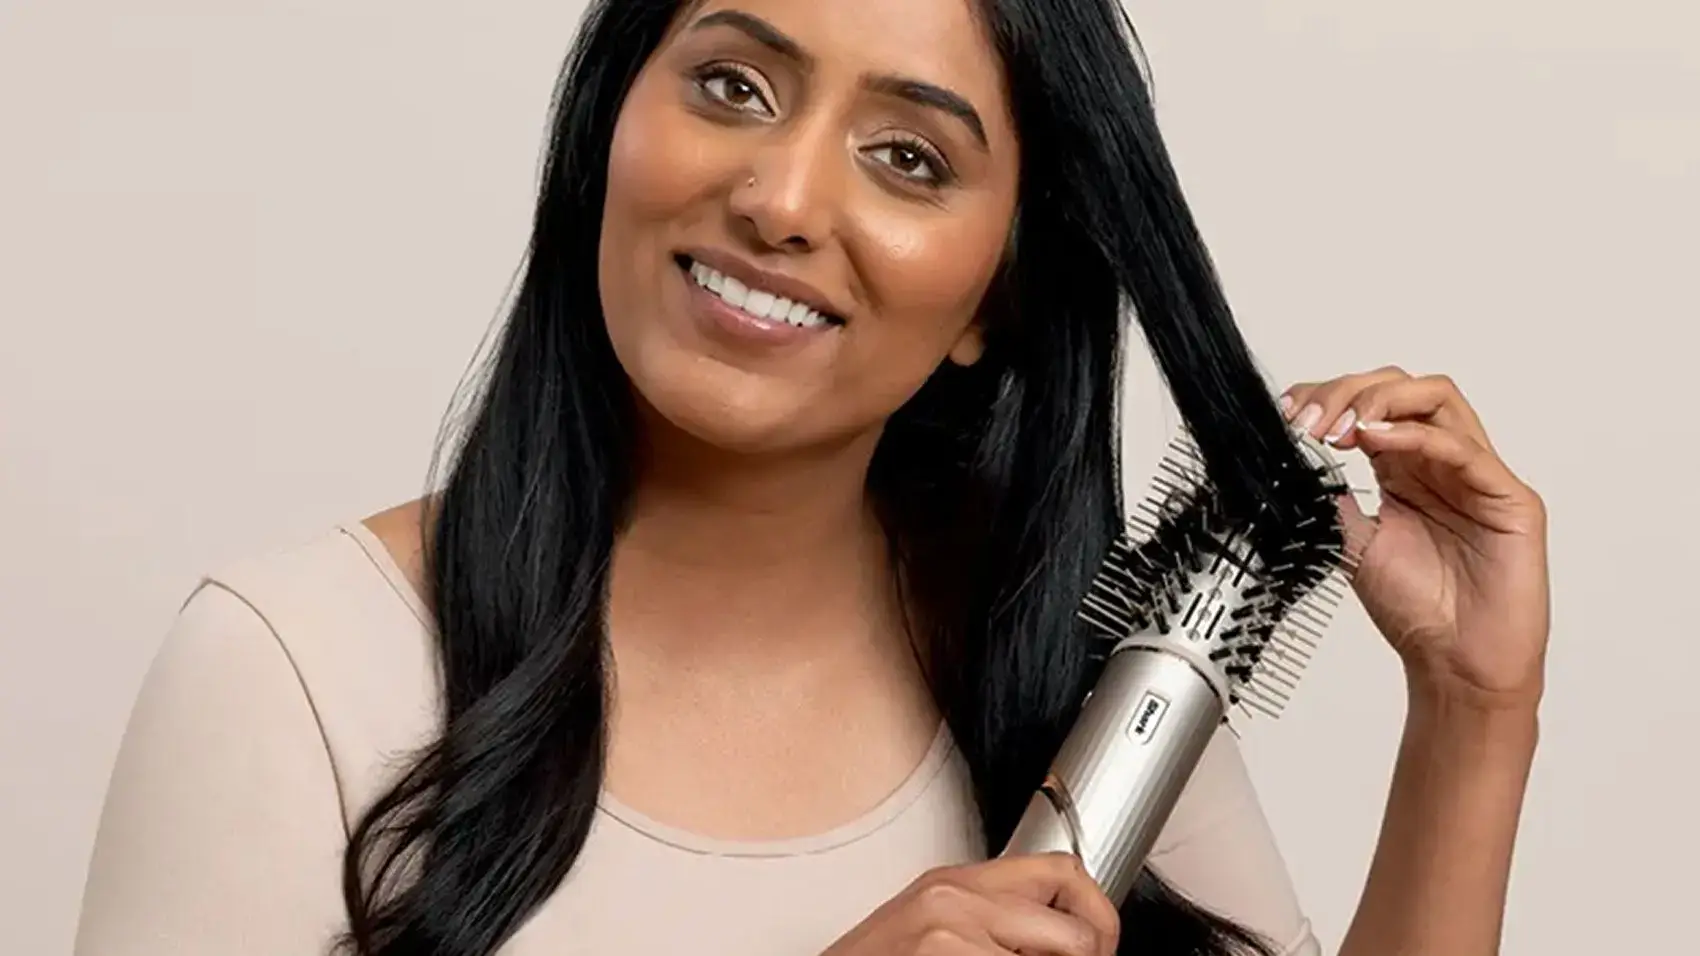 Woman smiling, using a hair dryer brush on her hair.